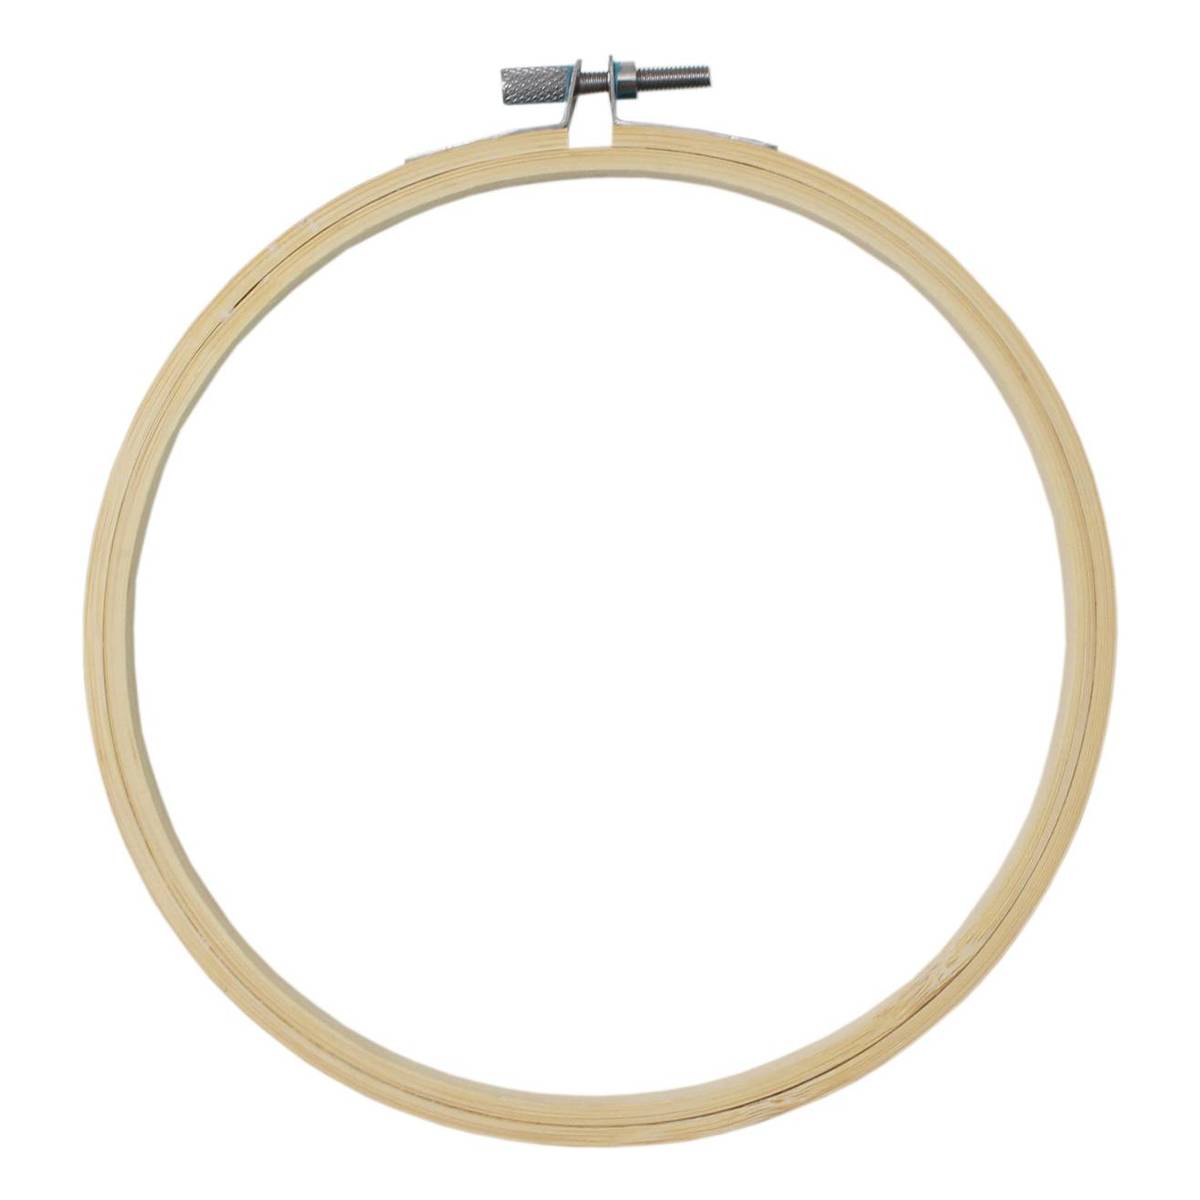 Bamboo Embroidery Hoop 6 Inches | Hobbycraft